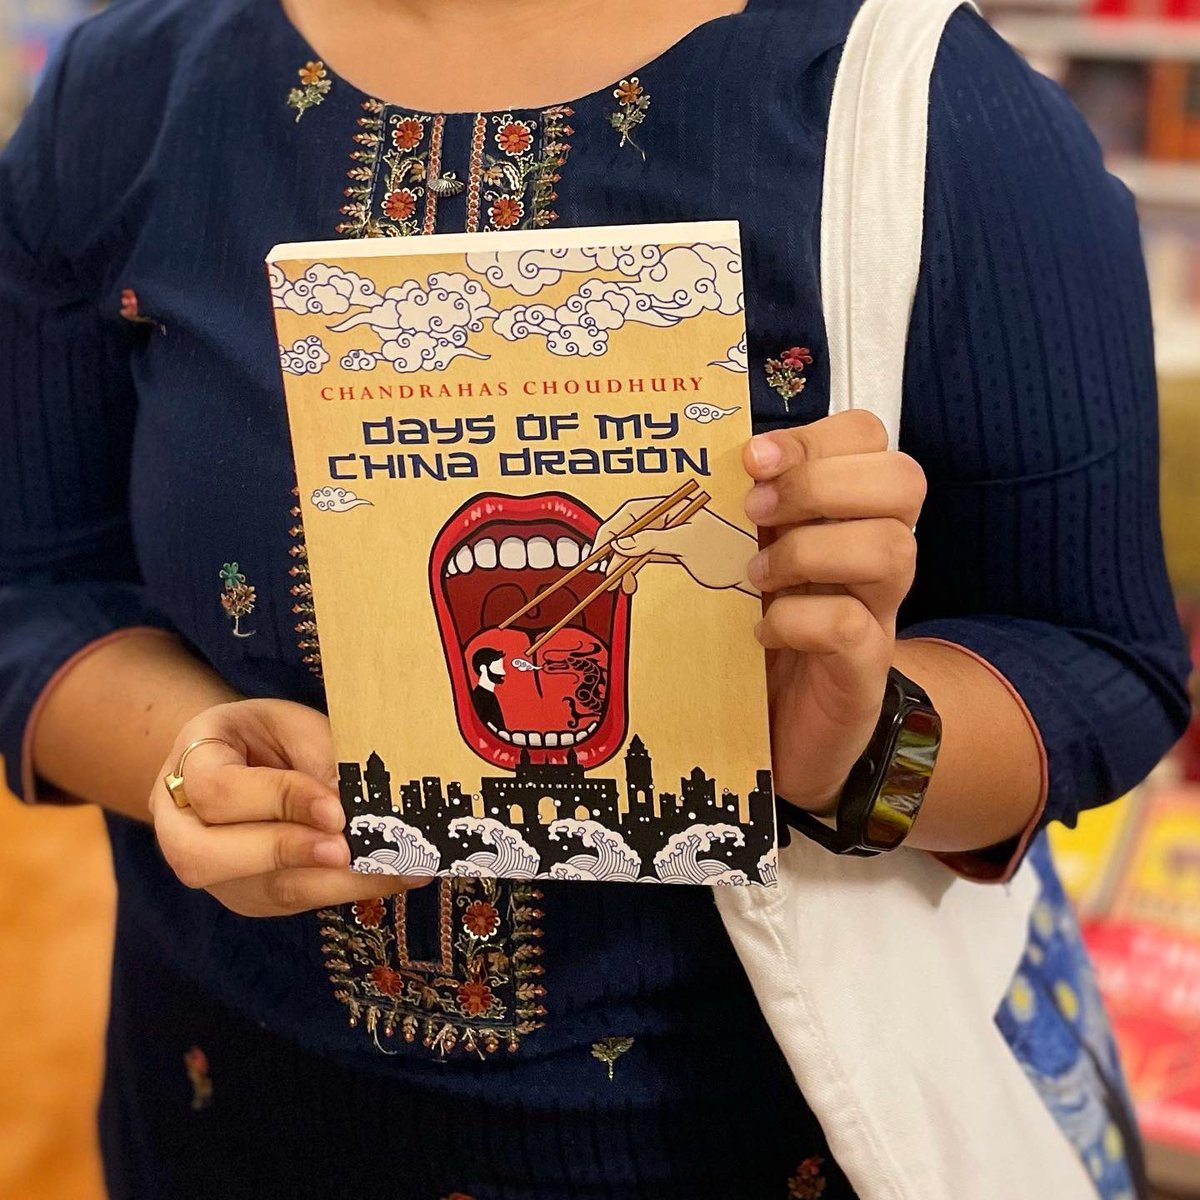 Days of My China Dragon by Chandrahas Choudhury is a hilarious and moving novel offering an insight into the the restaurant trade, and a little history of modern Indian life seen from behind the counter of a shop in Prabhadevi, Mumbai. @SimonSchusterIN